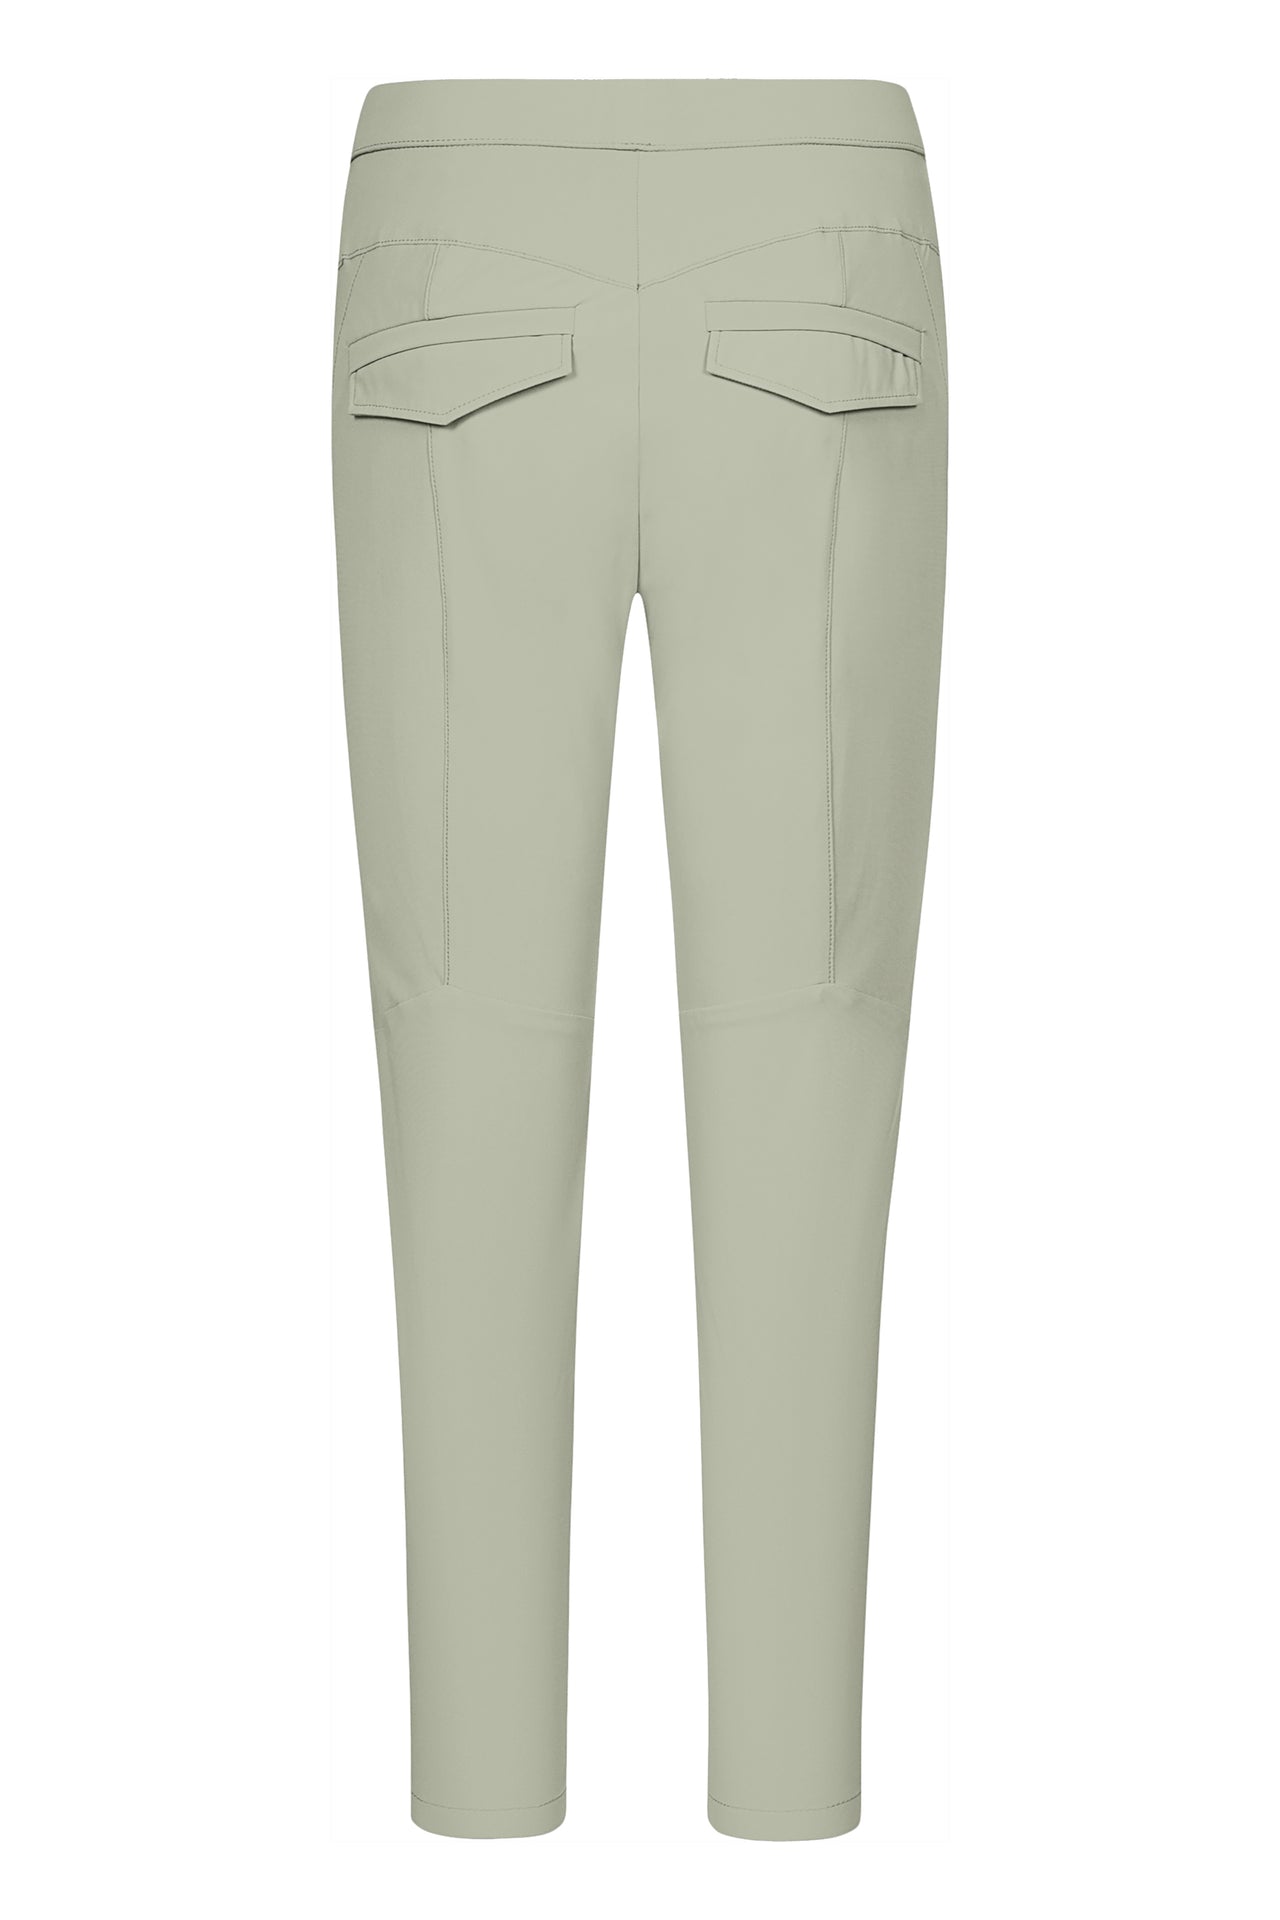 Holly Jersey Pants in Sage-Pants-Raffaello Rossi-Debs Boutique